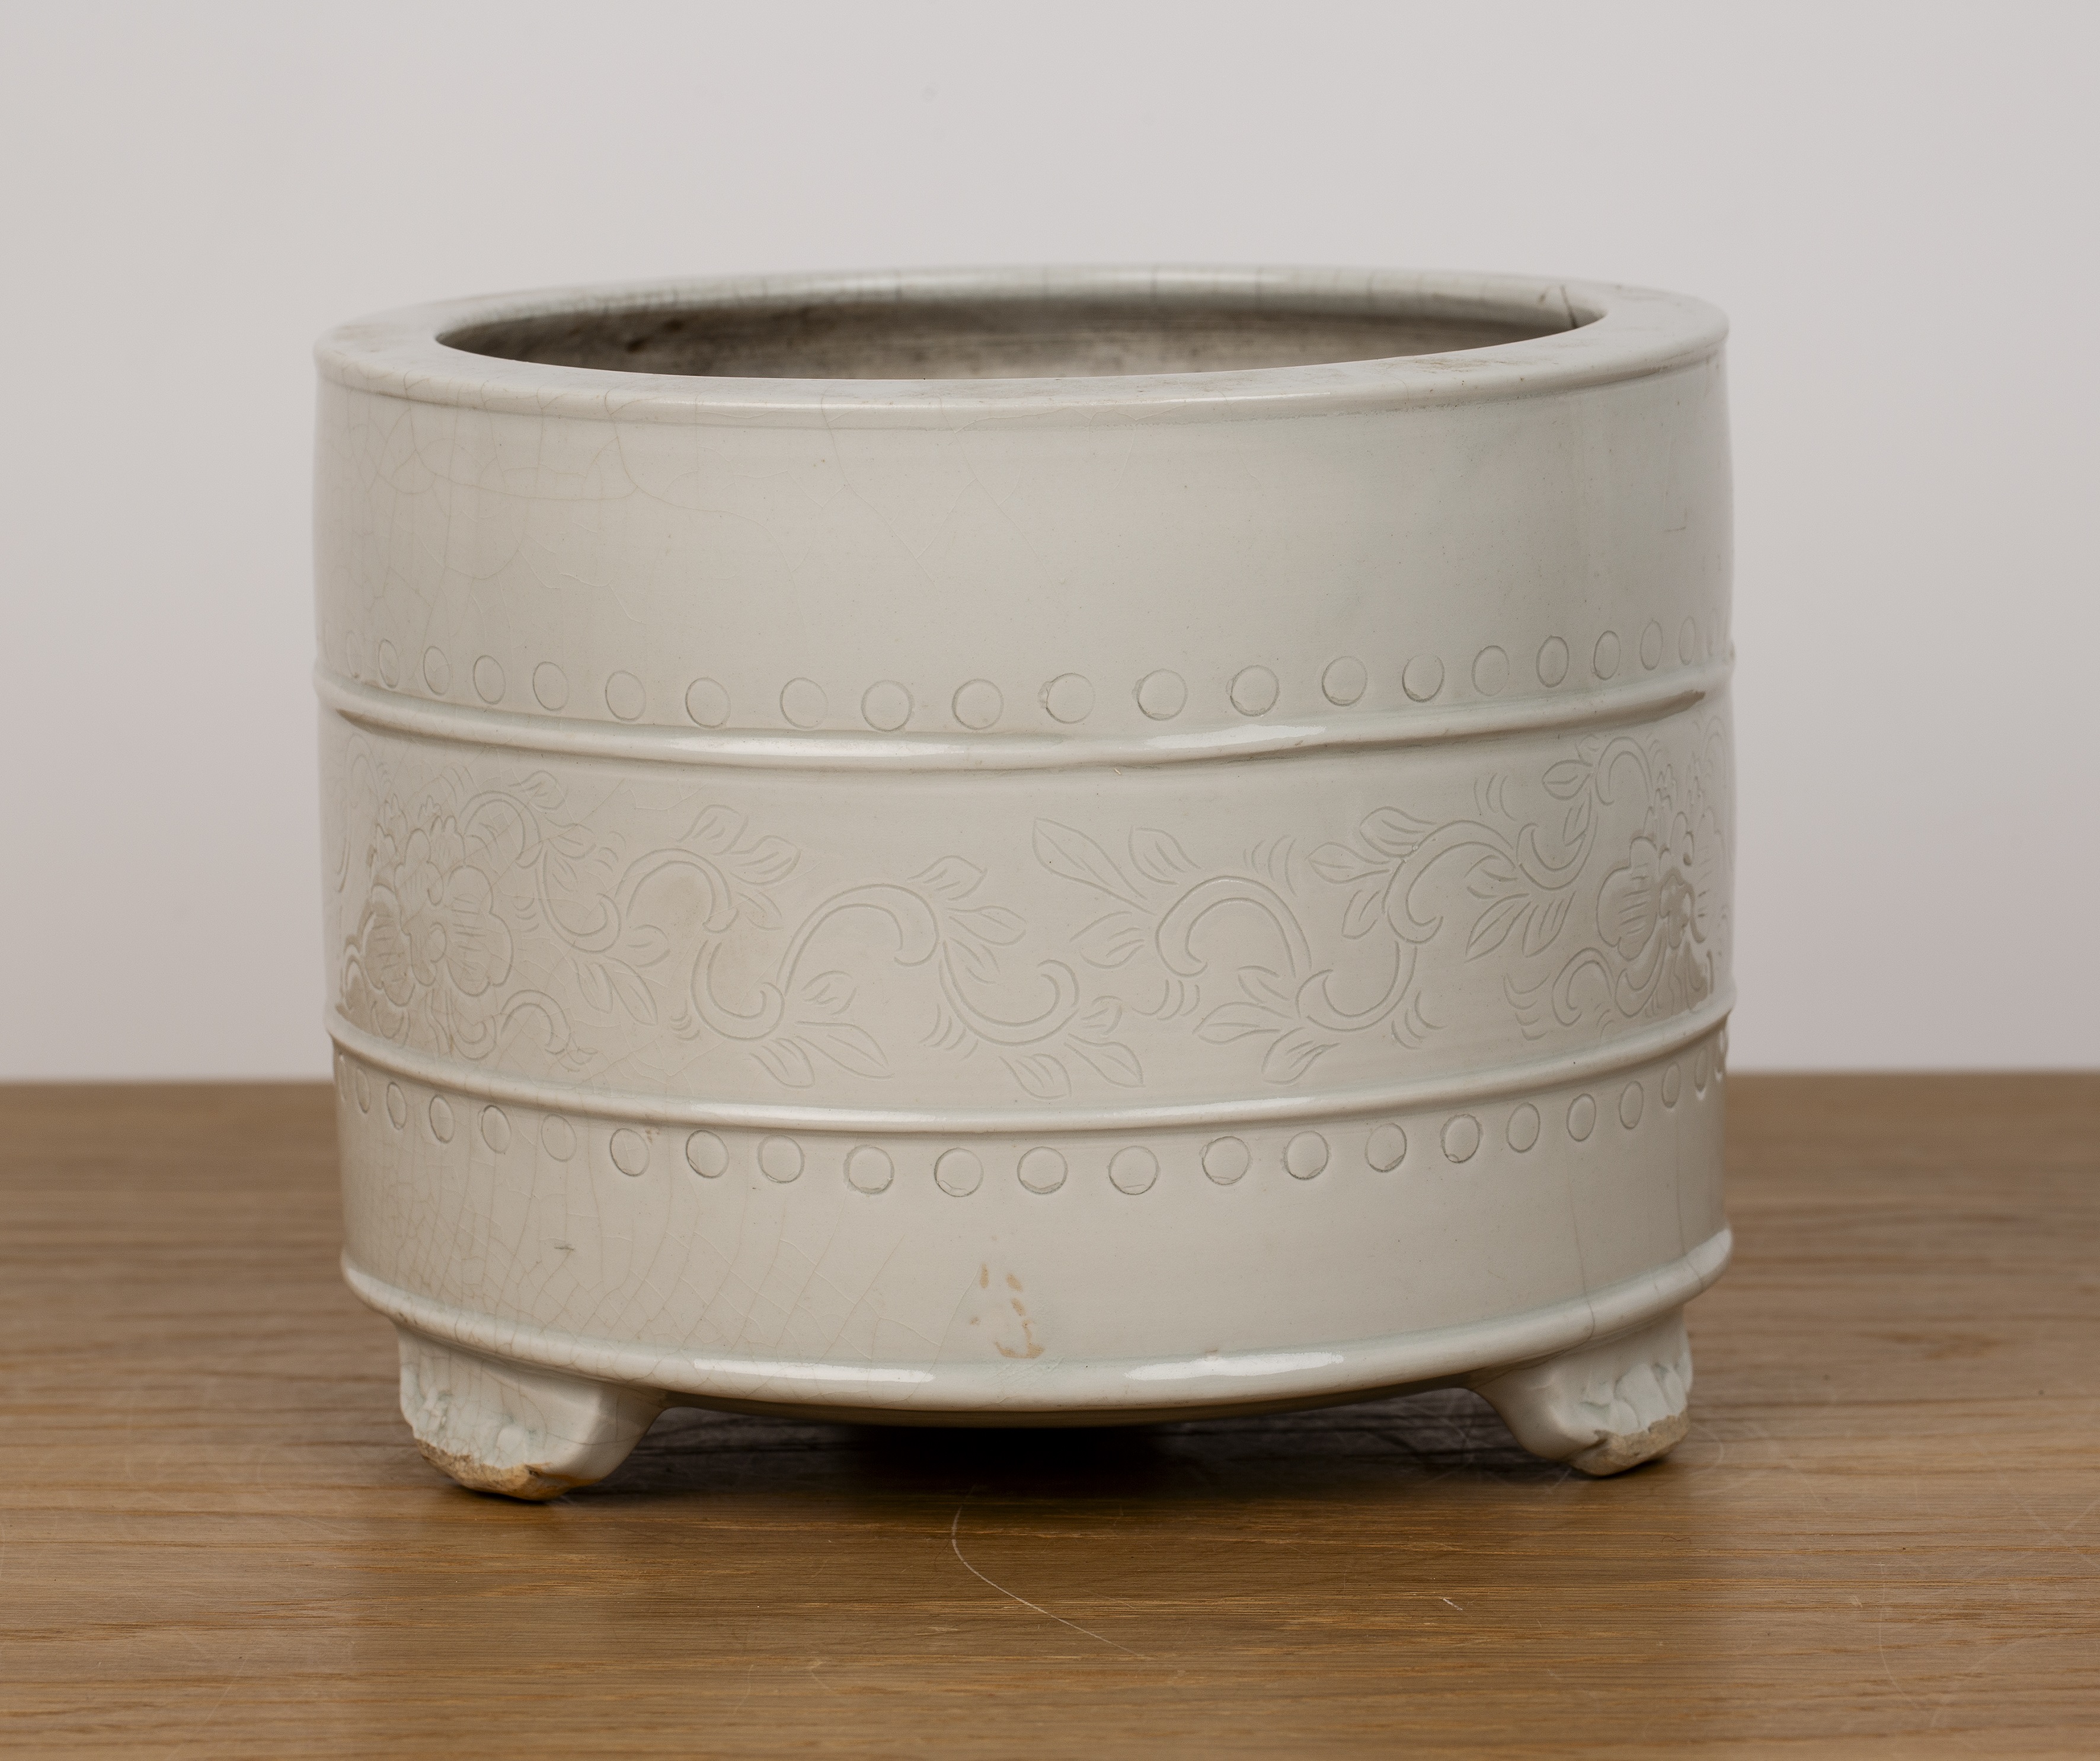 Blanc de chine censer Chinese, 19th Century with bands of incised decoration, 20.5cm diameter x 16cm - Image 2 of 5